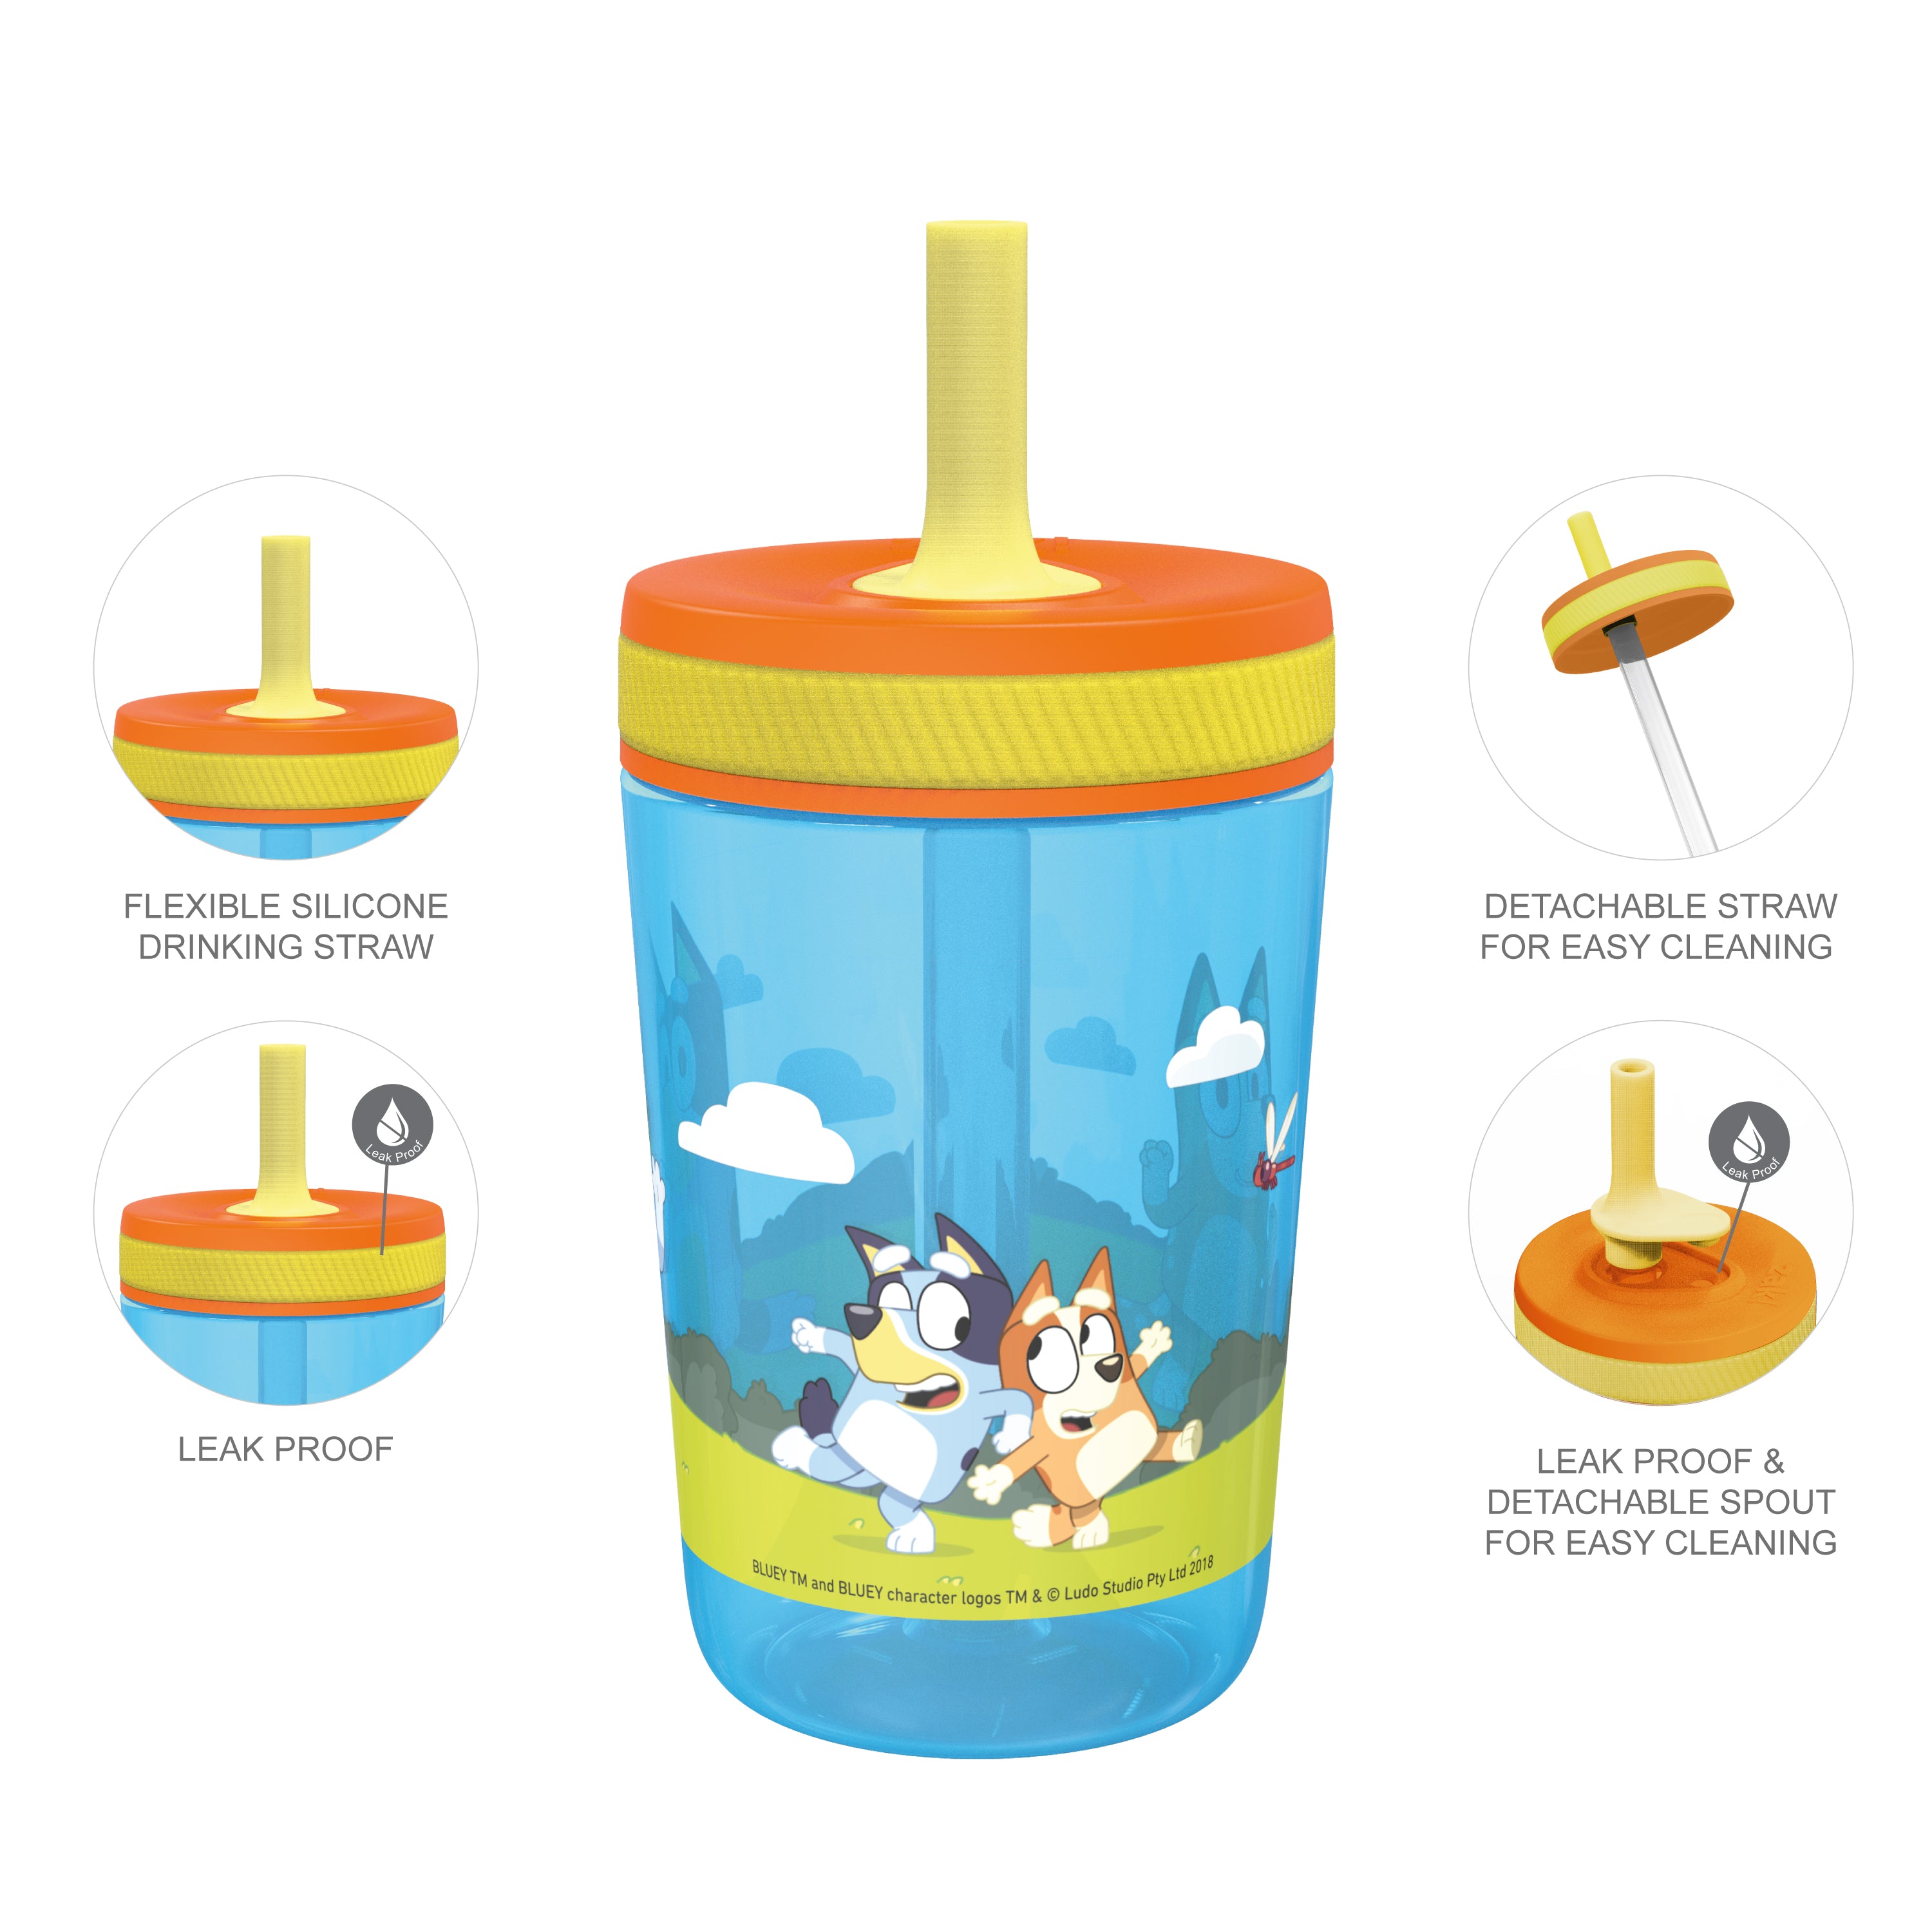 Zak Designs Bluey Kelso Toddler Cups For Travel or At Home, 12oz